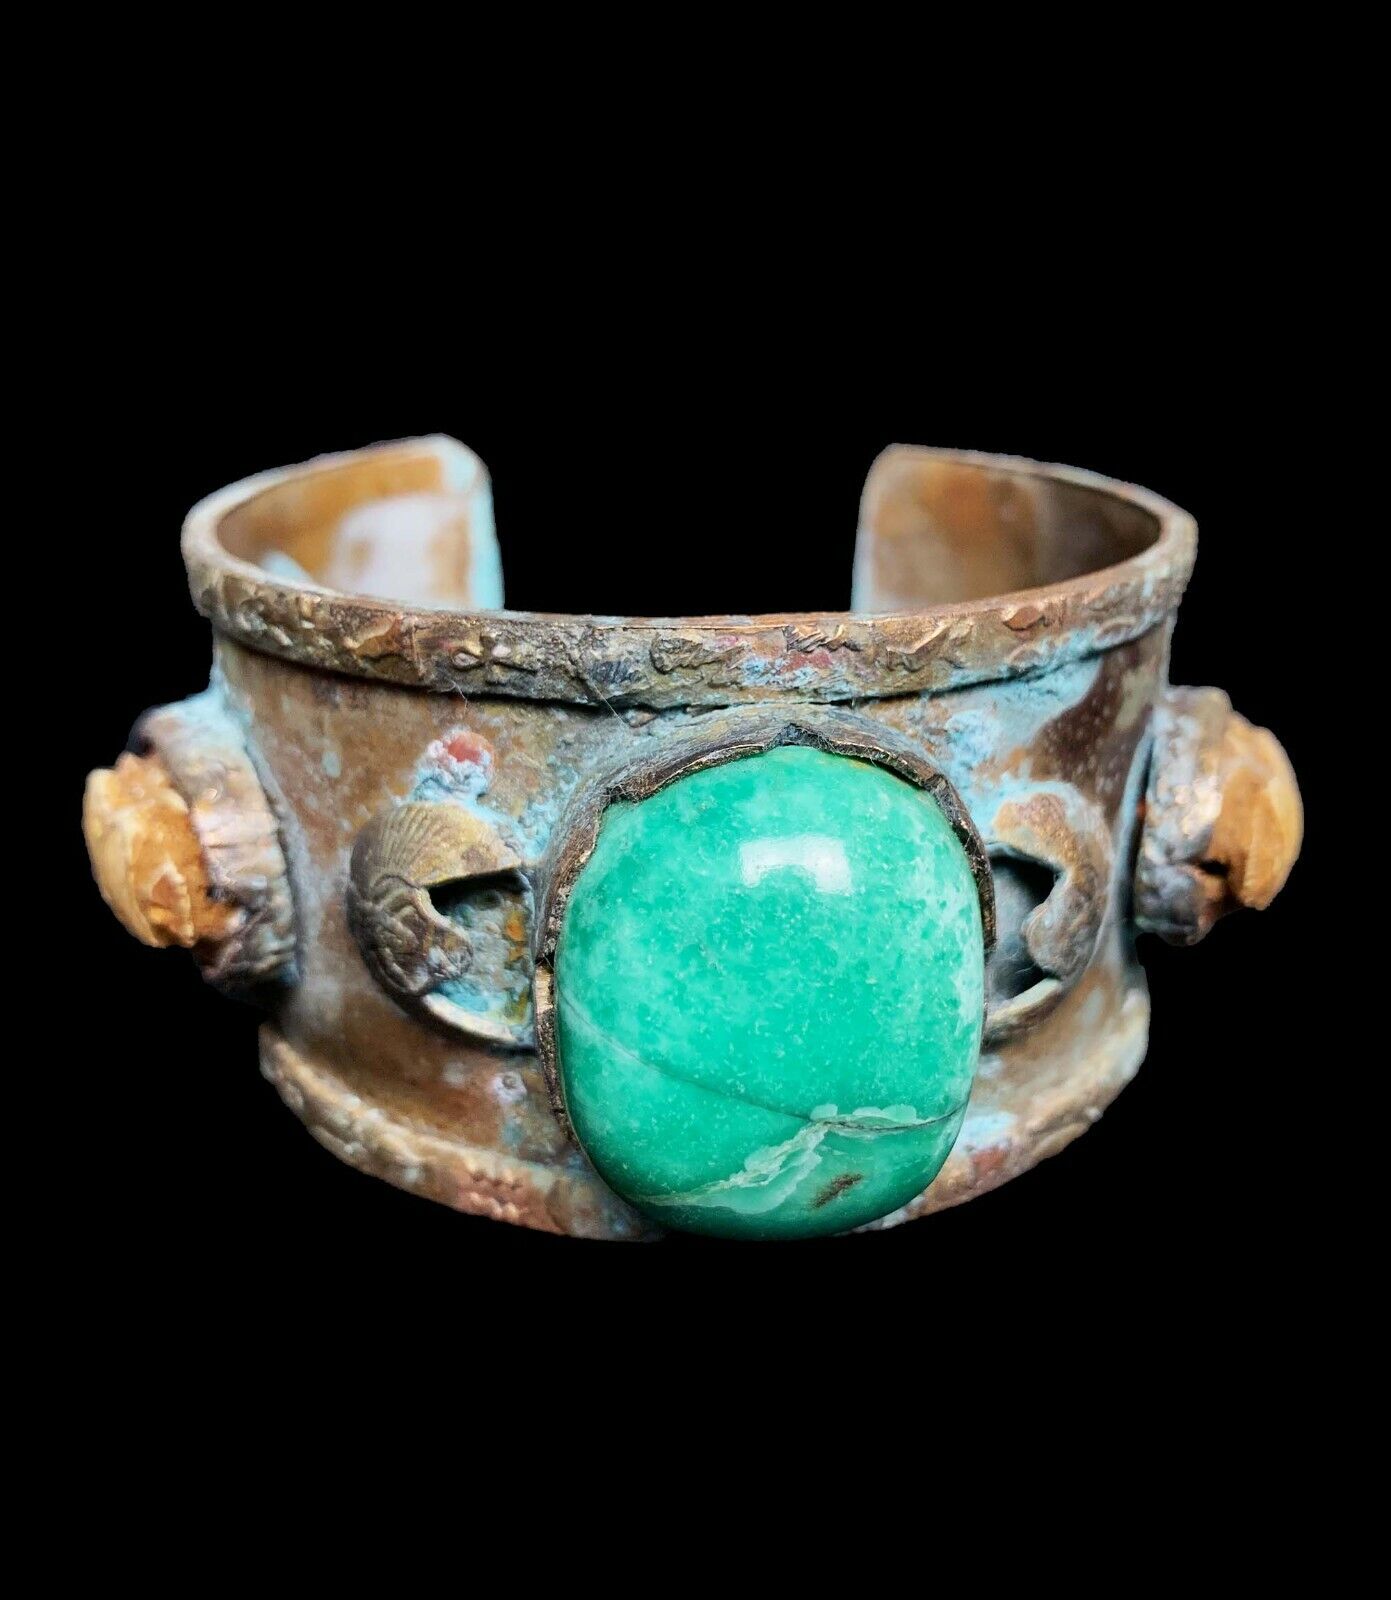 Unique Handmade Egyptian Bracelet with the Egyptian Scarab